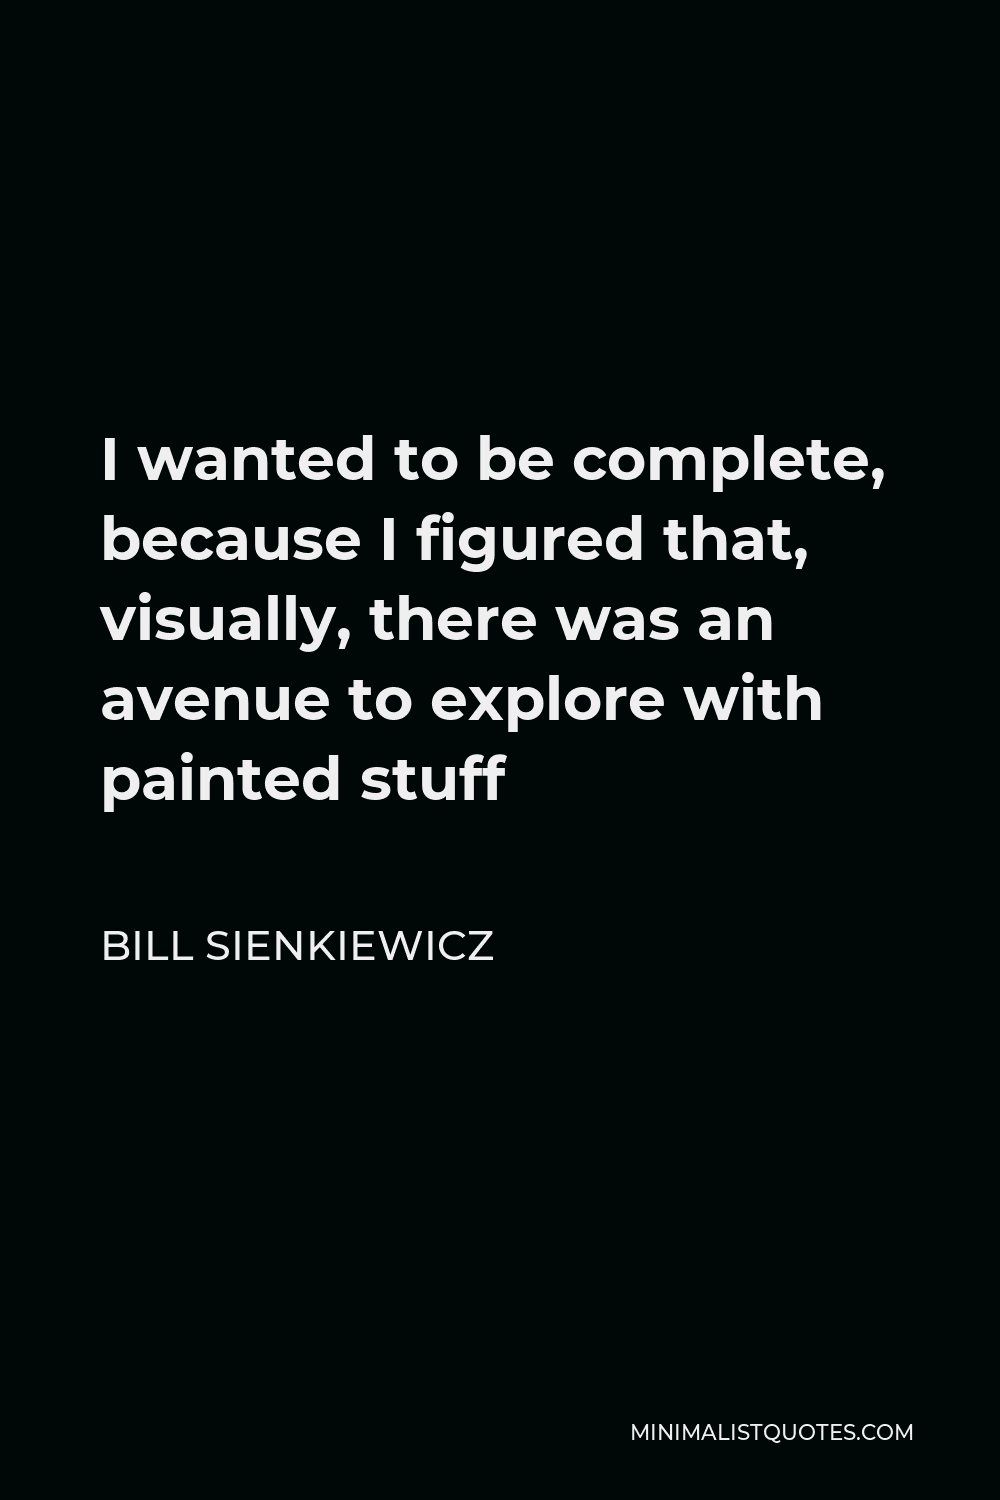 Bill Sienkiewicz Quote - I wanted to be complete, because I figured that, visually, there was an avenue to explore with painted stuff